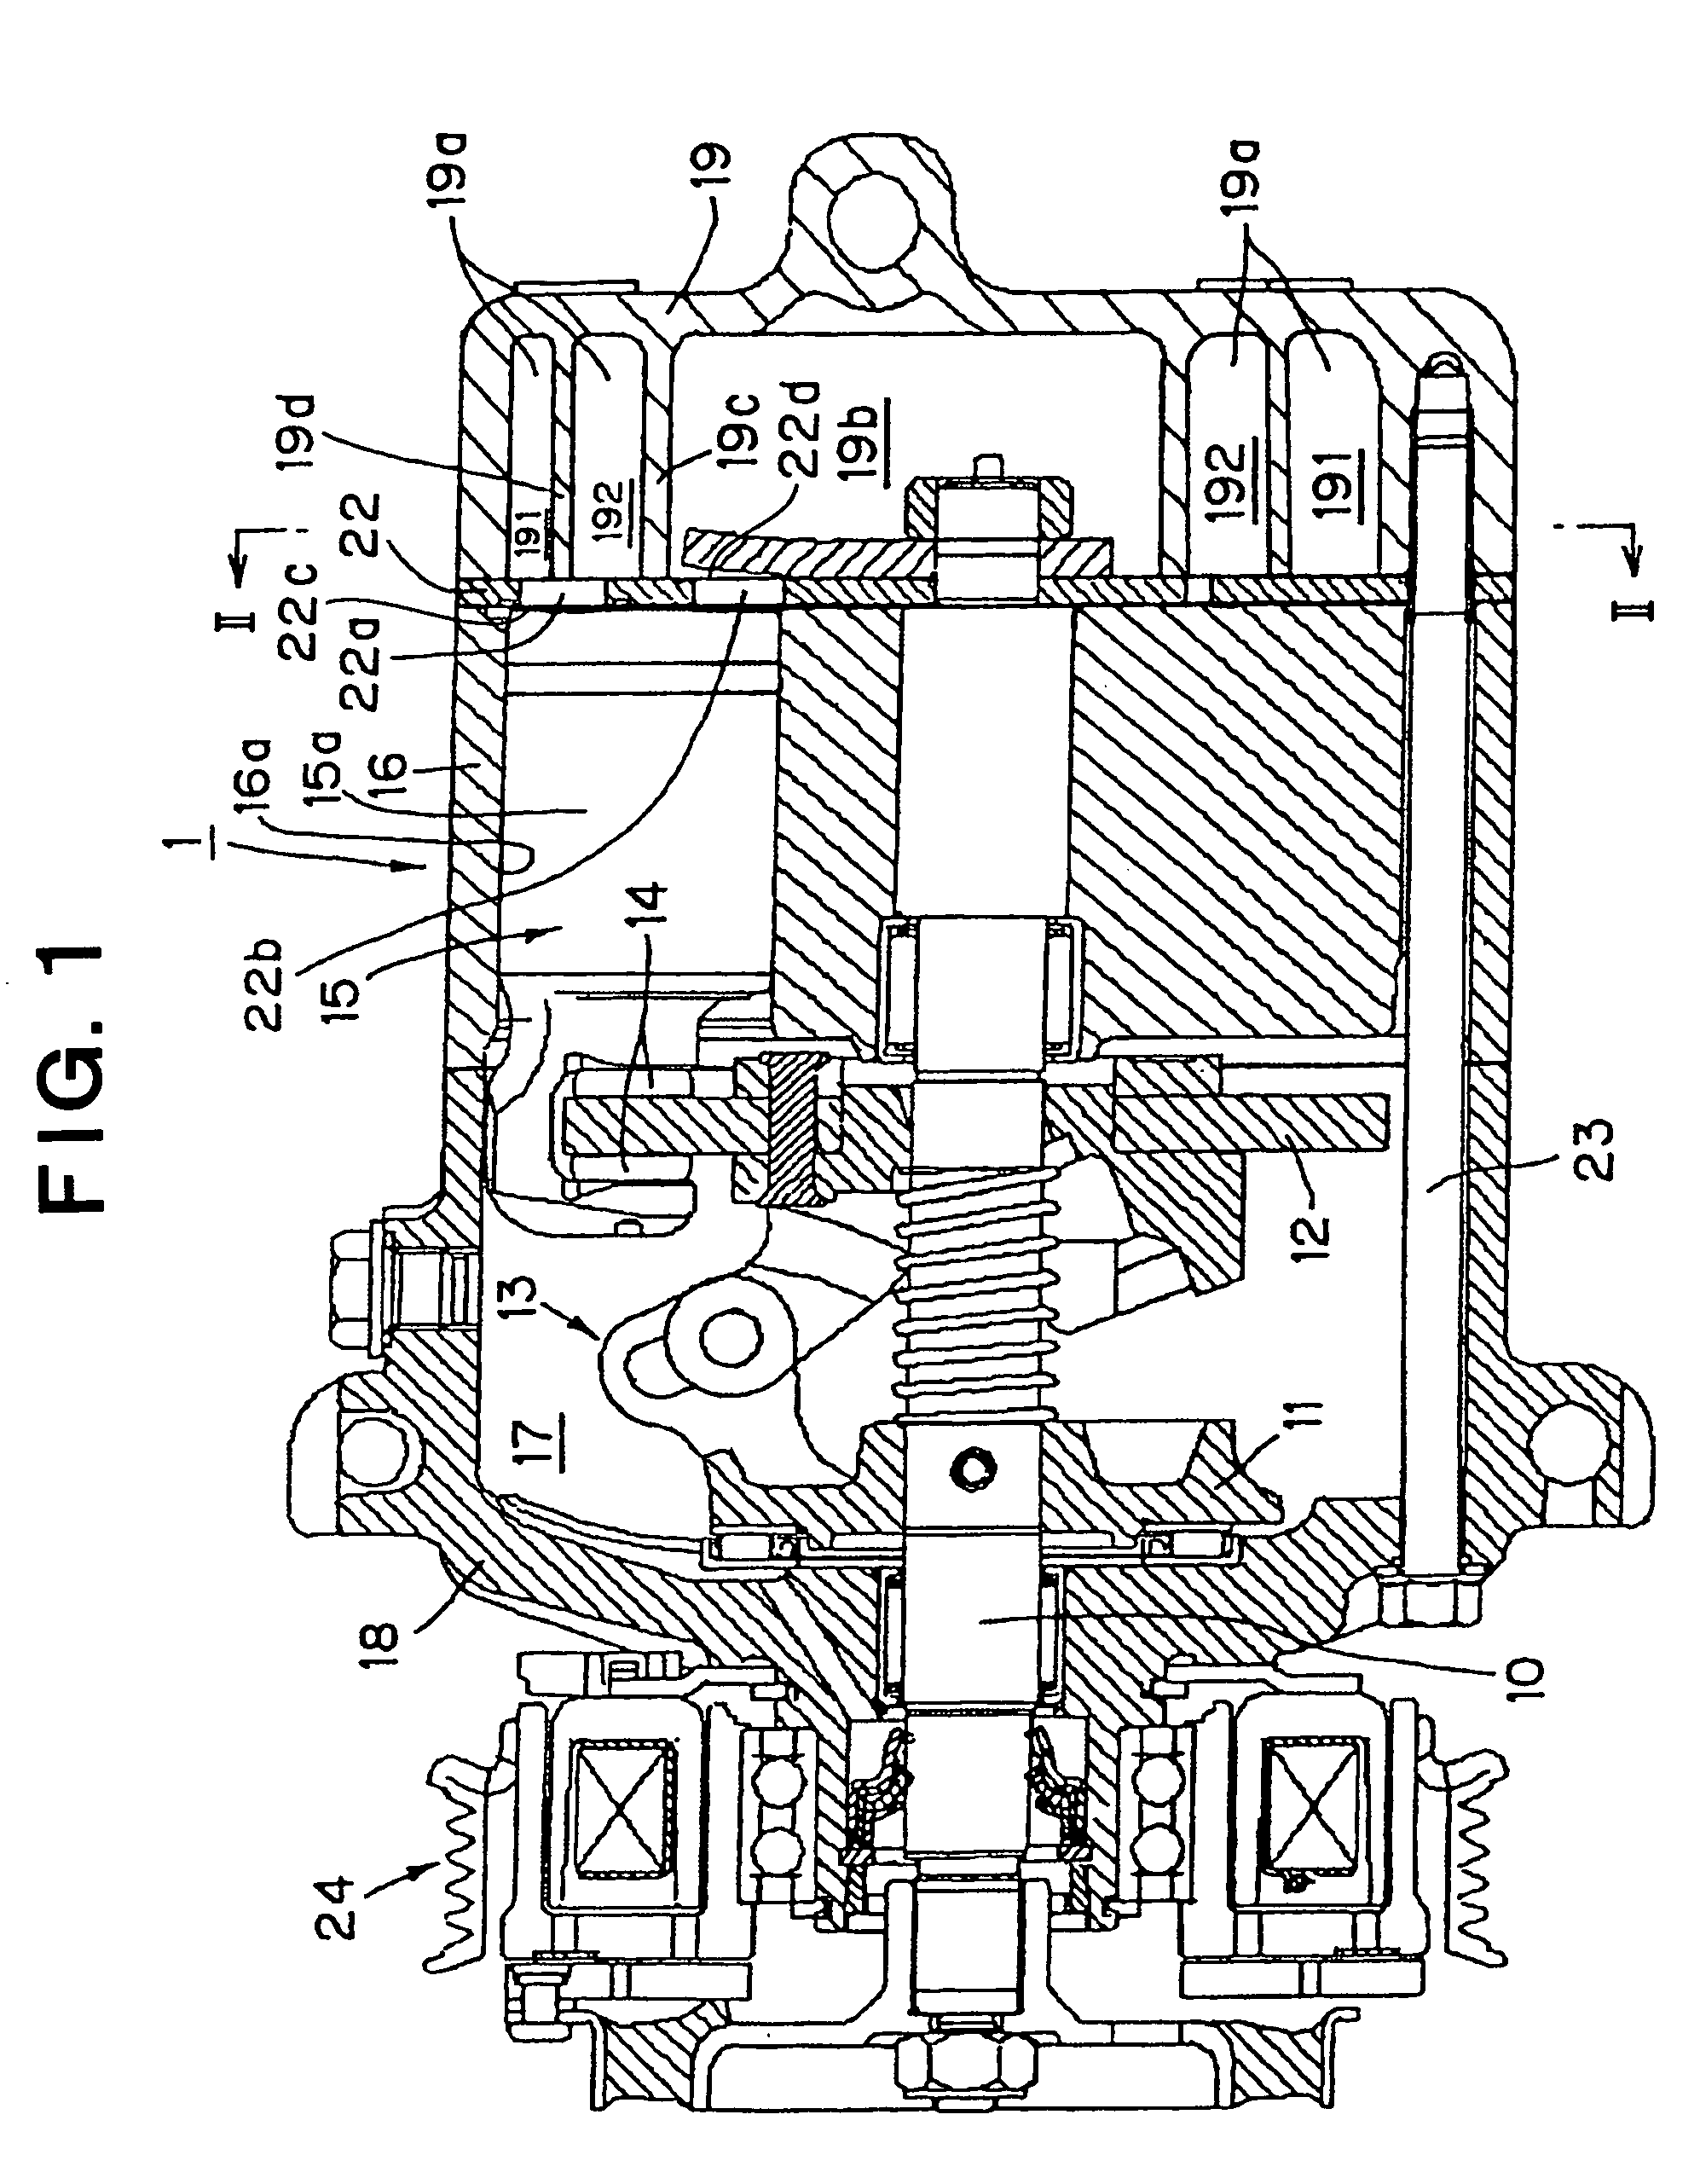 Multi-cylinder, reciprocating compressors for air conditioning systems mounted in vehicles